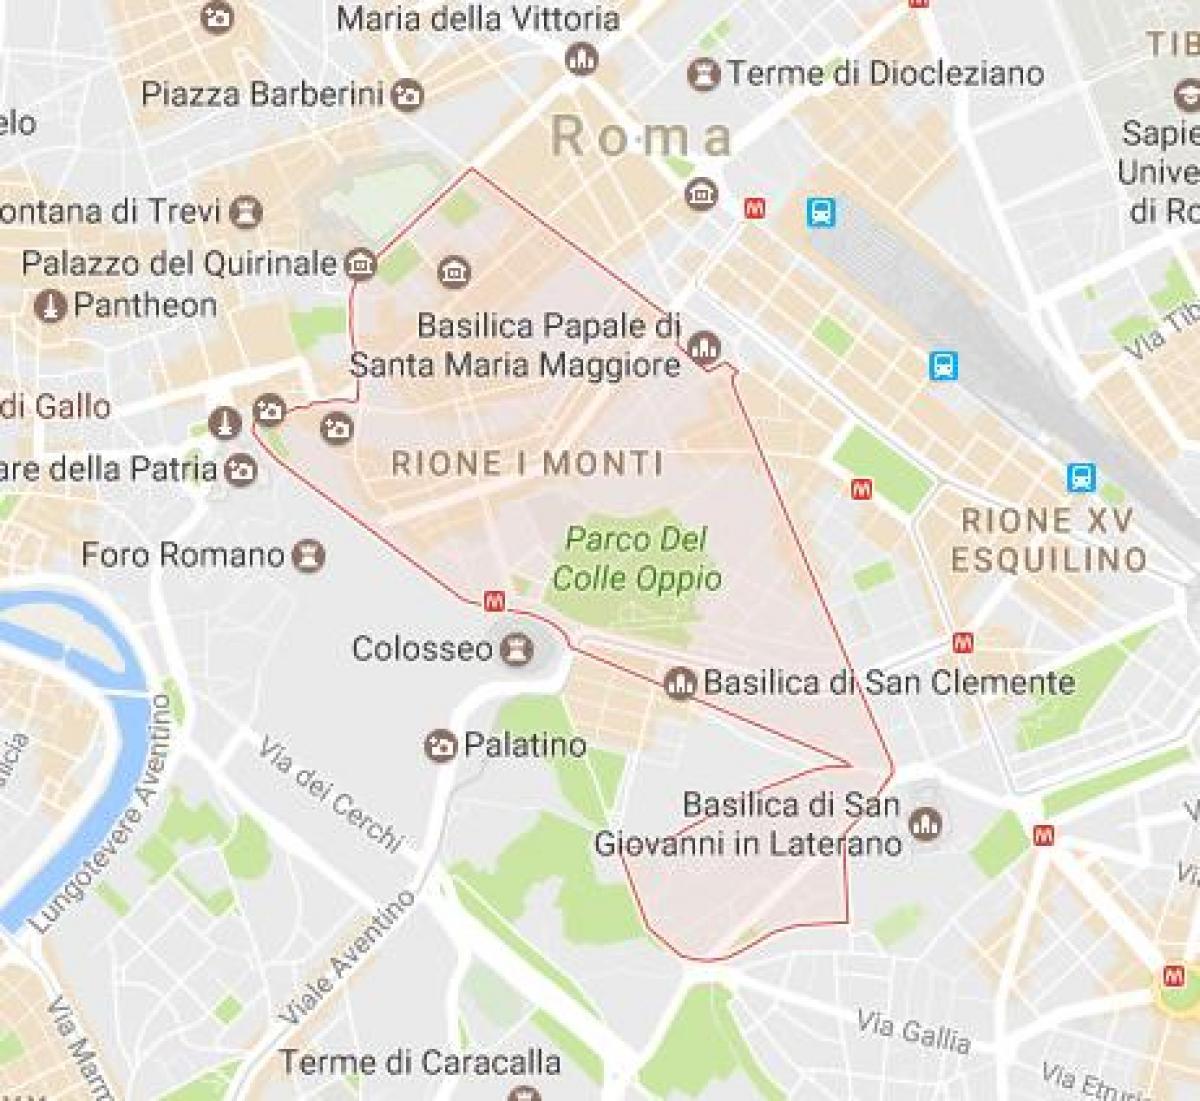 Map of monti Rome